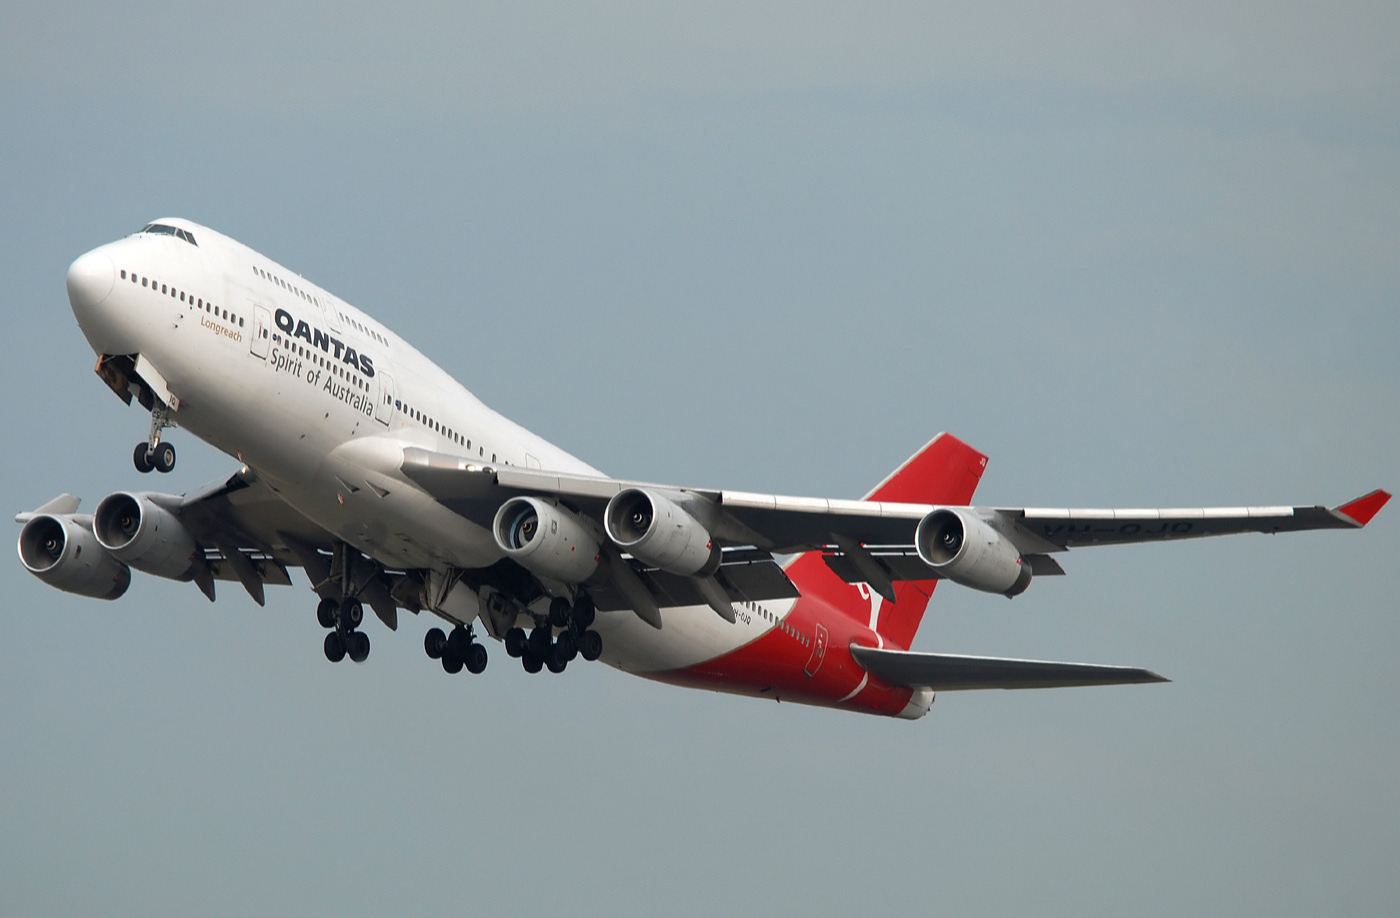 A Boeing 747 Once Flew With 5 Engines